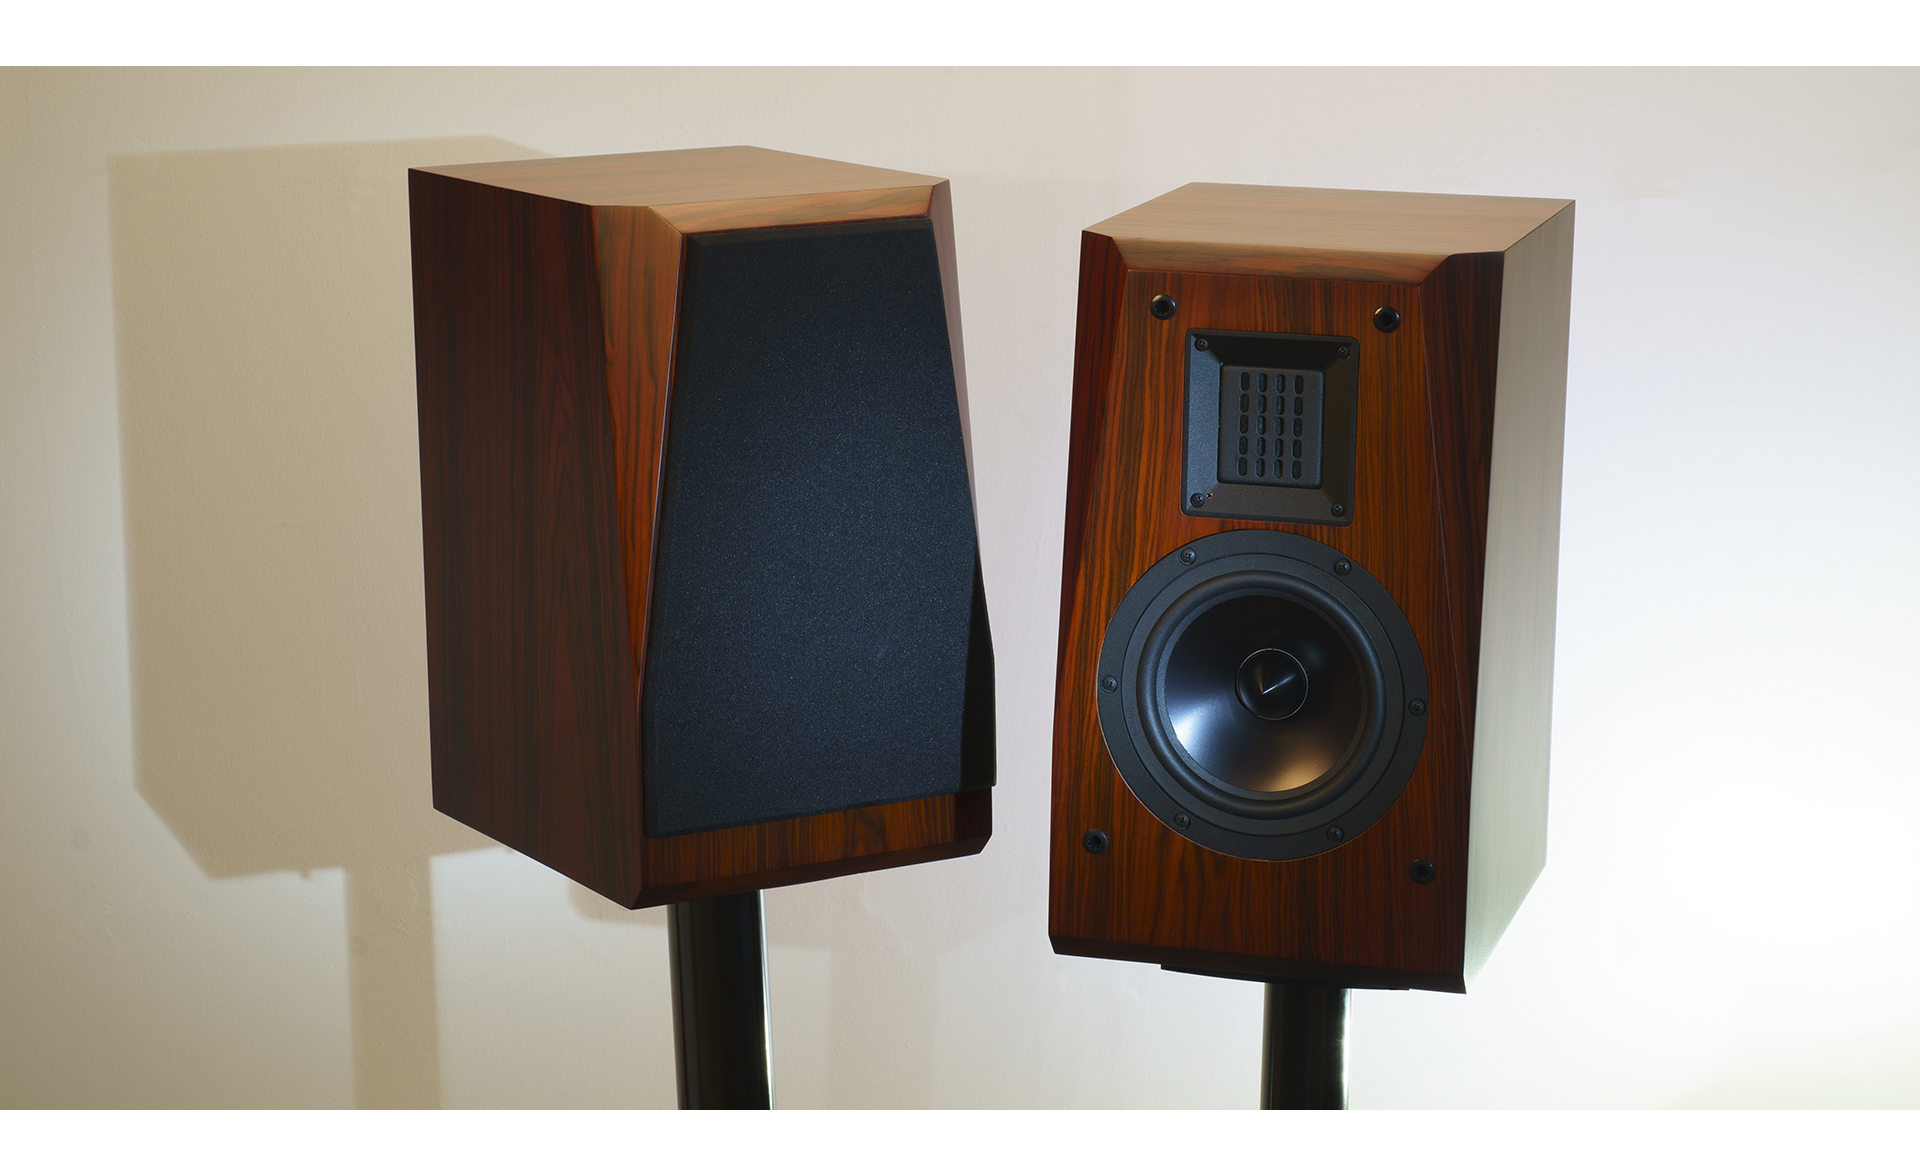 REVIEW: The LSA Signature 80 Speakers